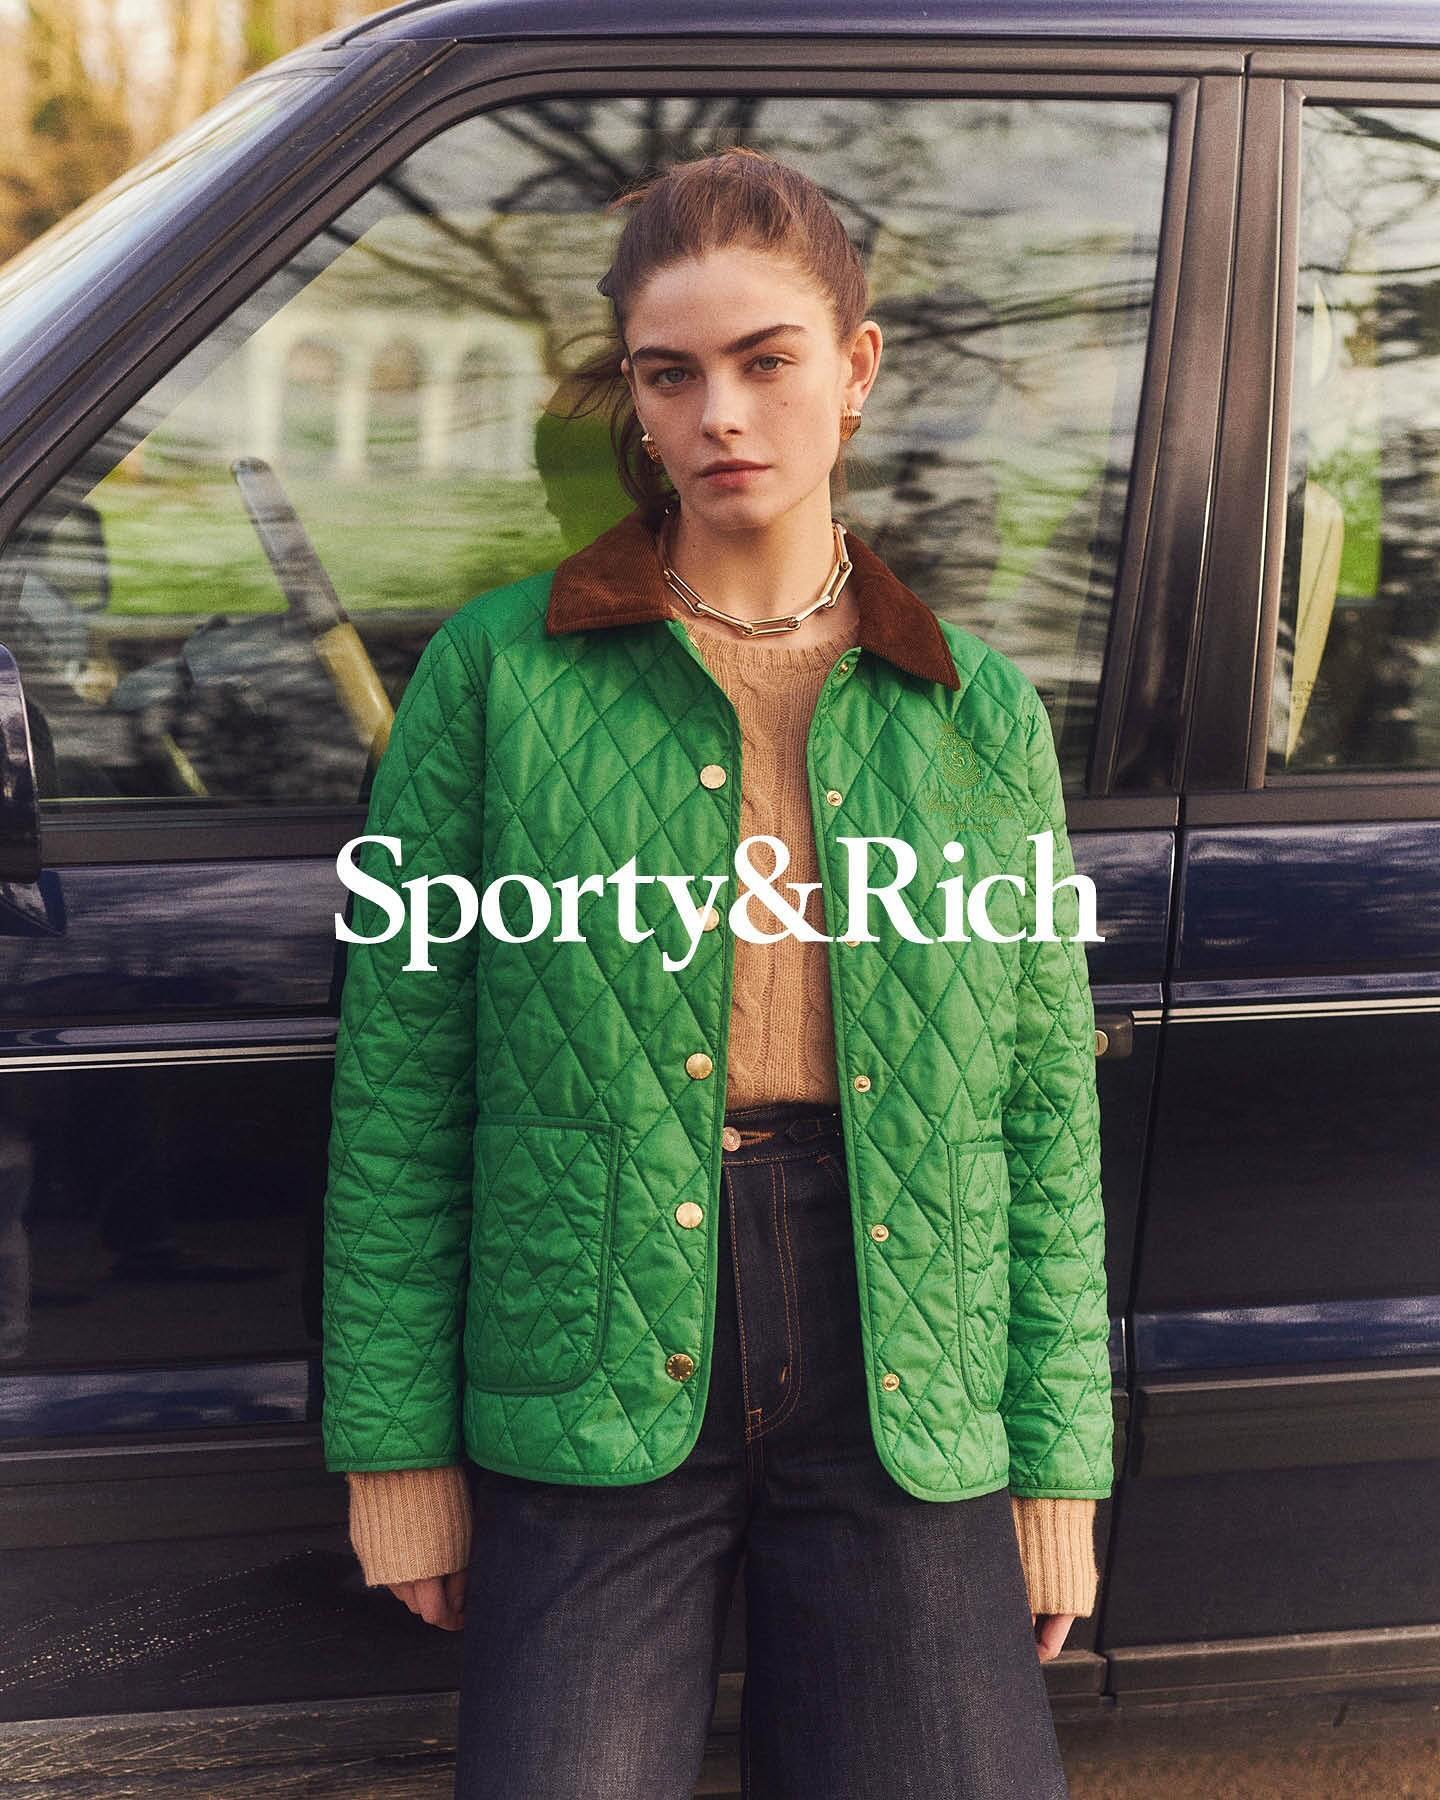 Sporty & Rich - Sporty & Rich - countryside - Inverno - Reino Unido - https://stealthelook.com.br